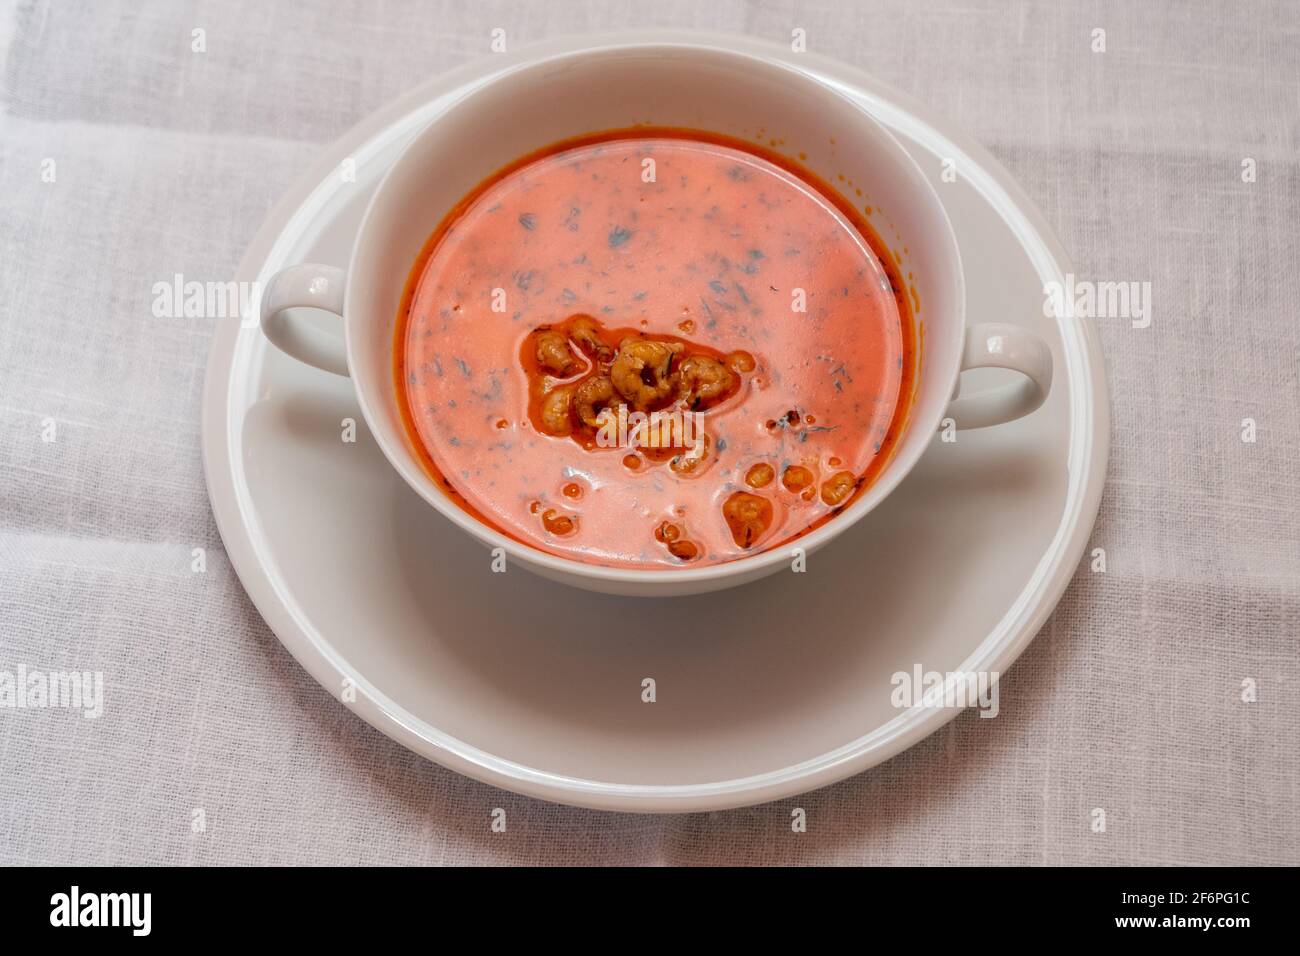 Busumer Krabbensuppe, Busom Style Soup with North Sea Crabs in a White Bowl, Served with a Slice of Bread Stock Photo